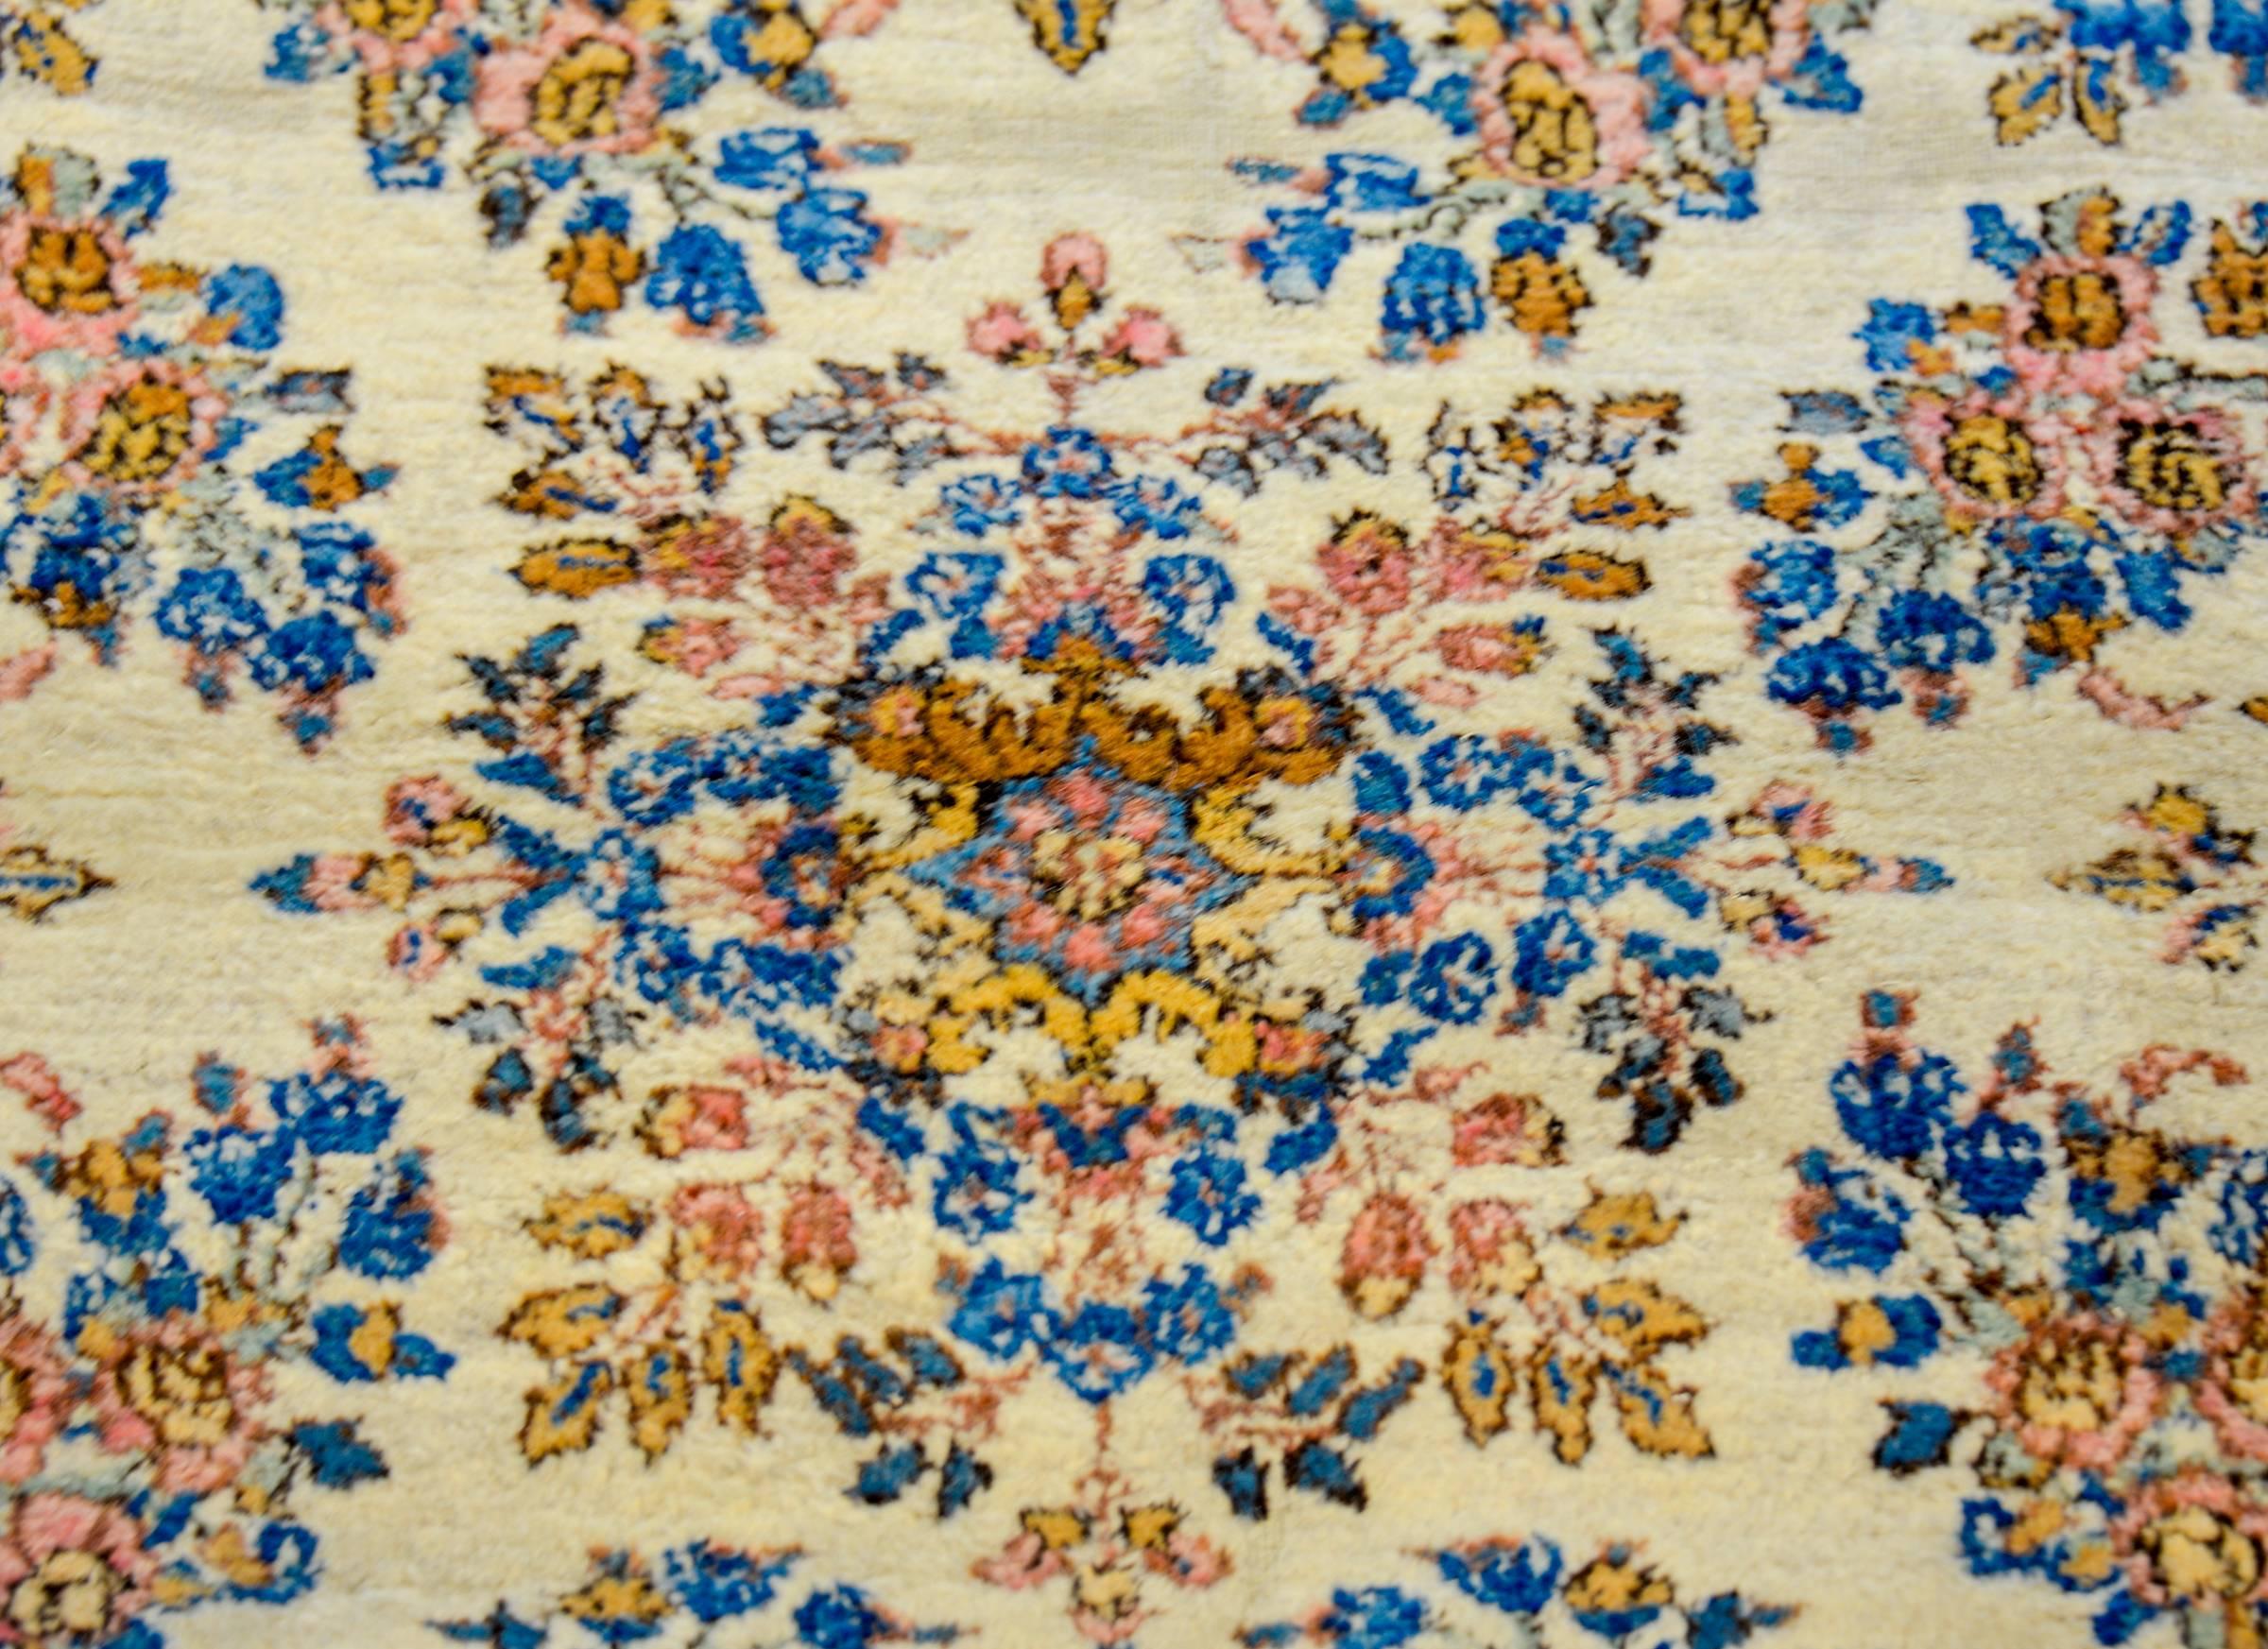 An amazing early 20th century Persian almost square Kirman rug woven with an incredibly high quality shimmering silky indigo and gold vegetable dyed wool with a large diamond form floral medallion. The border is fantastic with an intensely woven